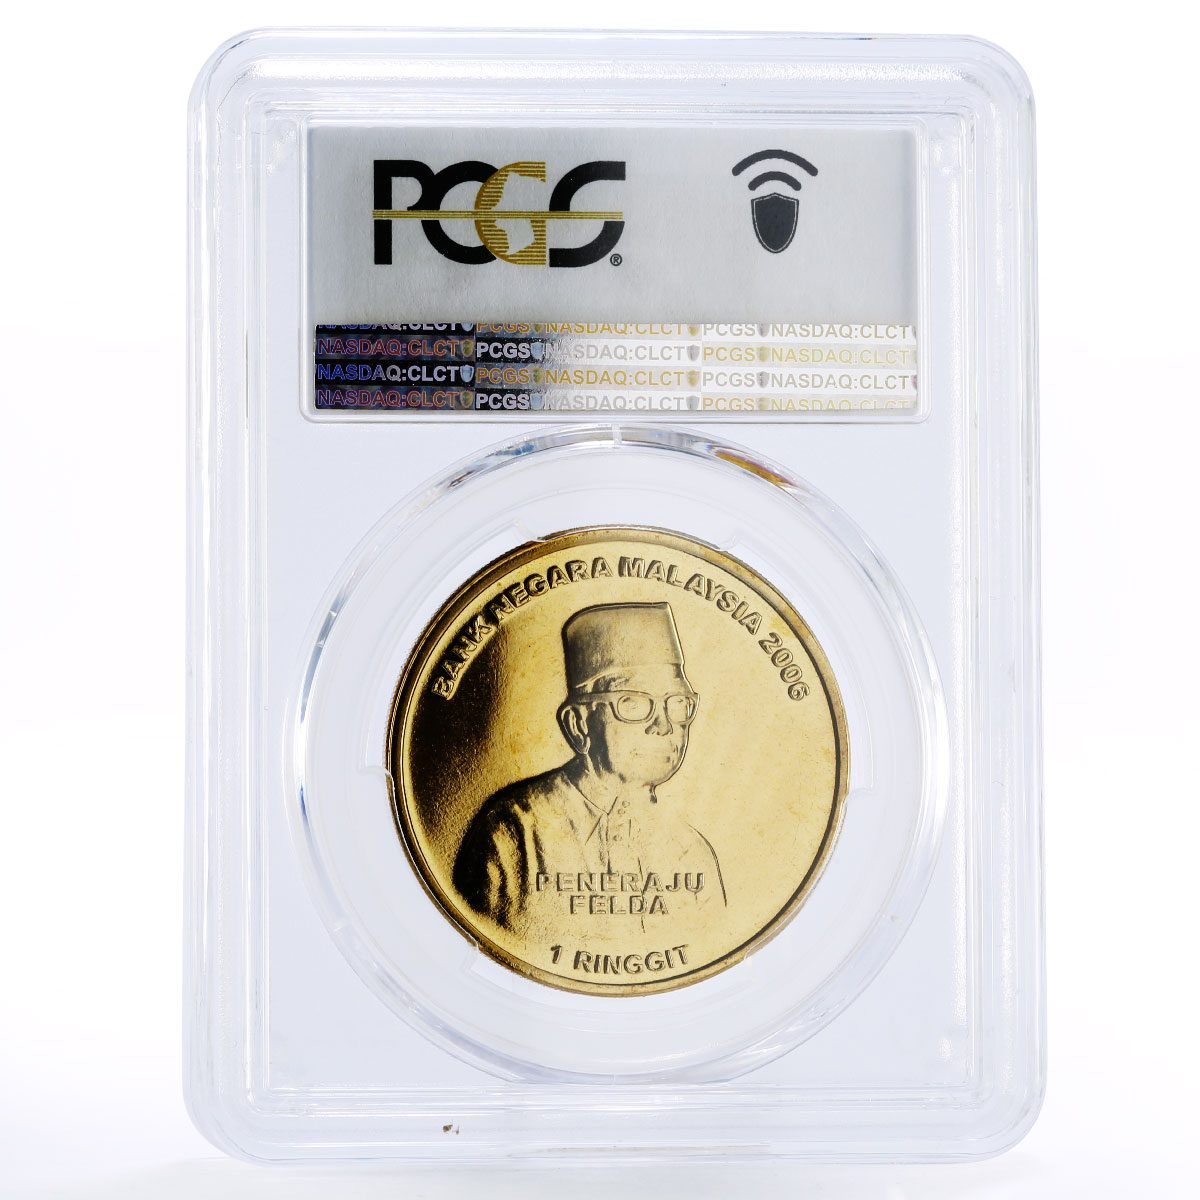 Malaysia 1 ringgit Federal Land Development Authority MS67 PCGS brass coin 2006